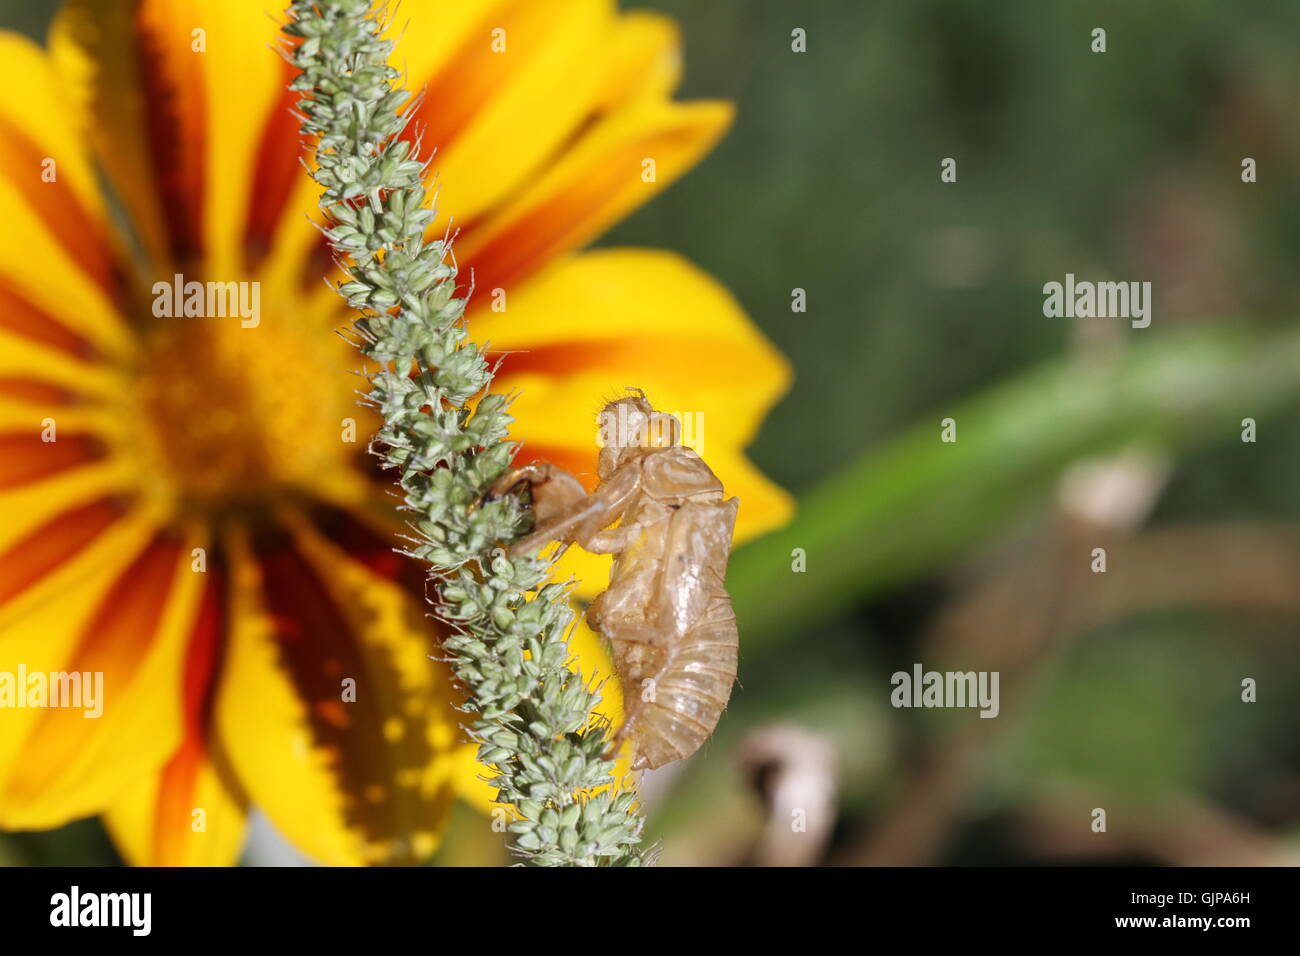 empty cicada shell or casing four from moulted cicada insect on yellow gazania flower in Italy hemiptera cicadidae by Ruth Swan Stock Photo